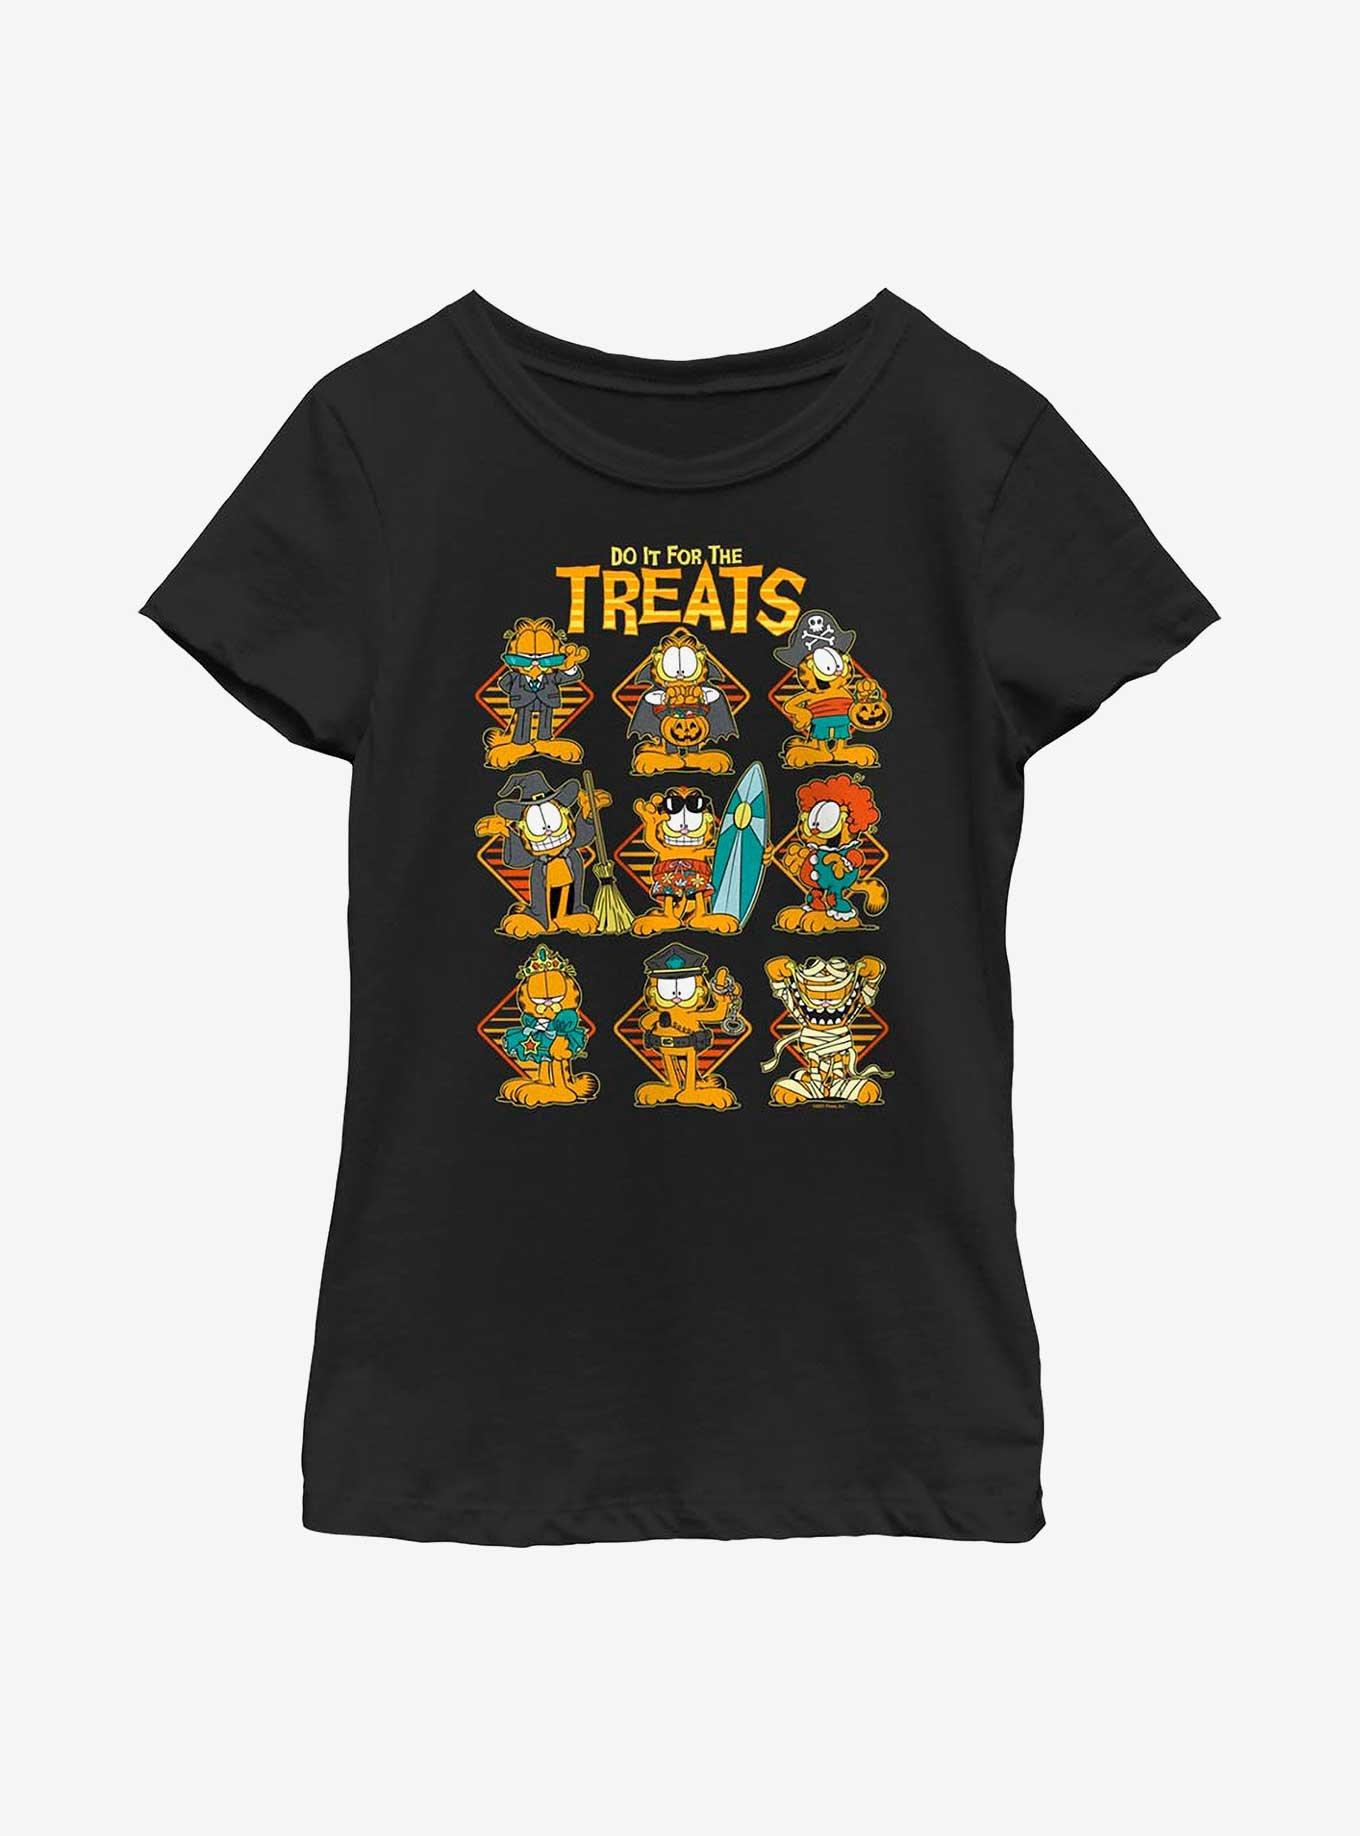 Garfield For The Treats Youth Girl's T-Shirt, BLACK, hi-res